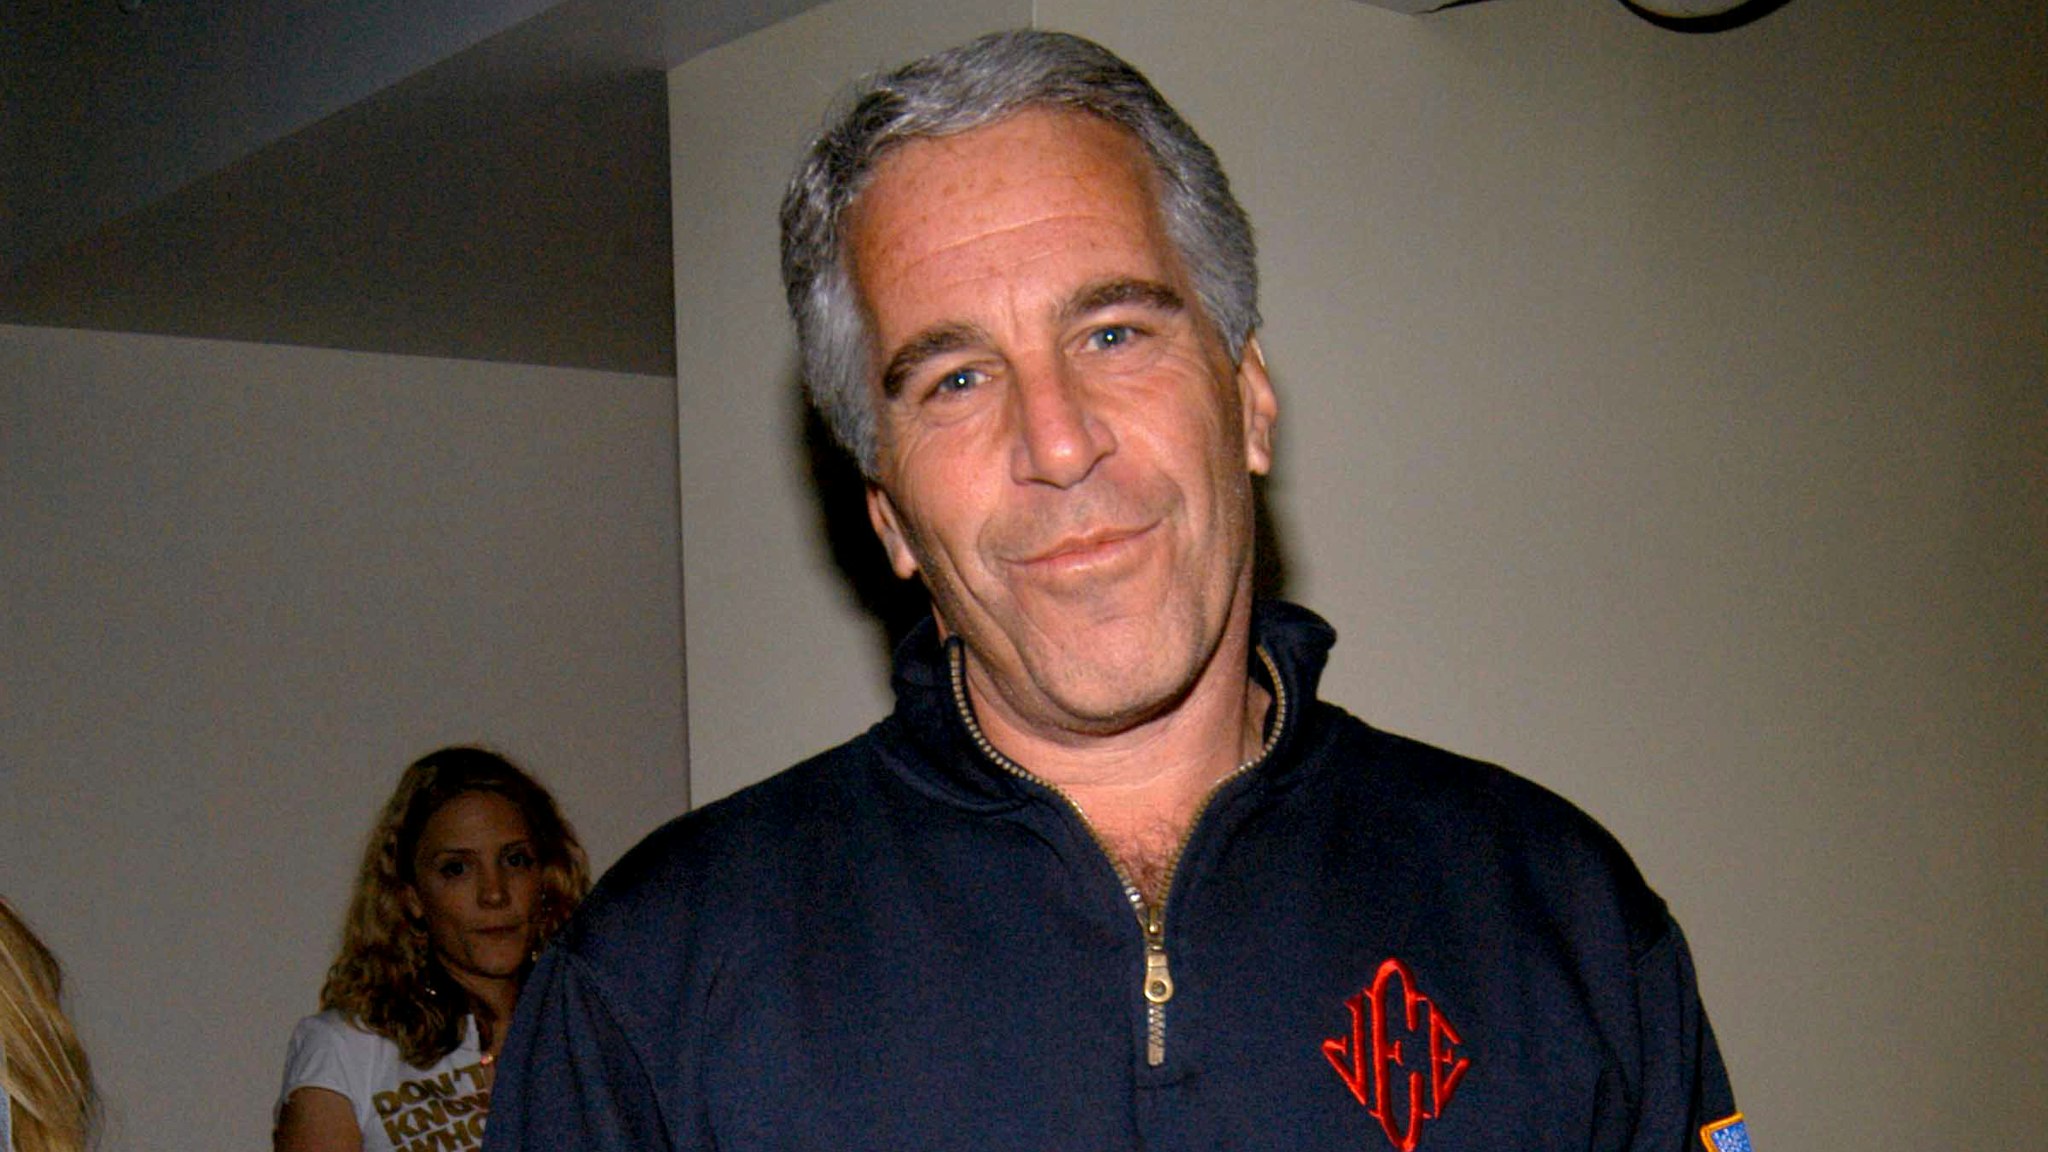 NEW YORK, NY - MAY 18: Jeffrey Epstein attends Launch of RADAR MAGAZINE at Hotel QT on May 18, 2005 in New York City.